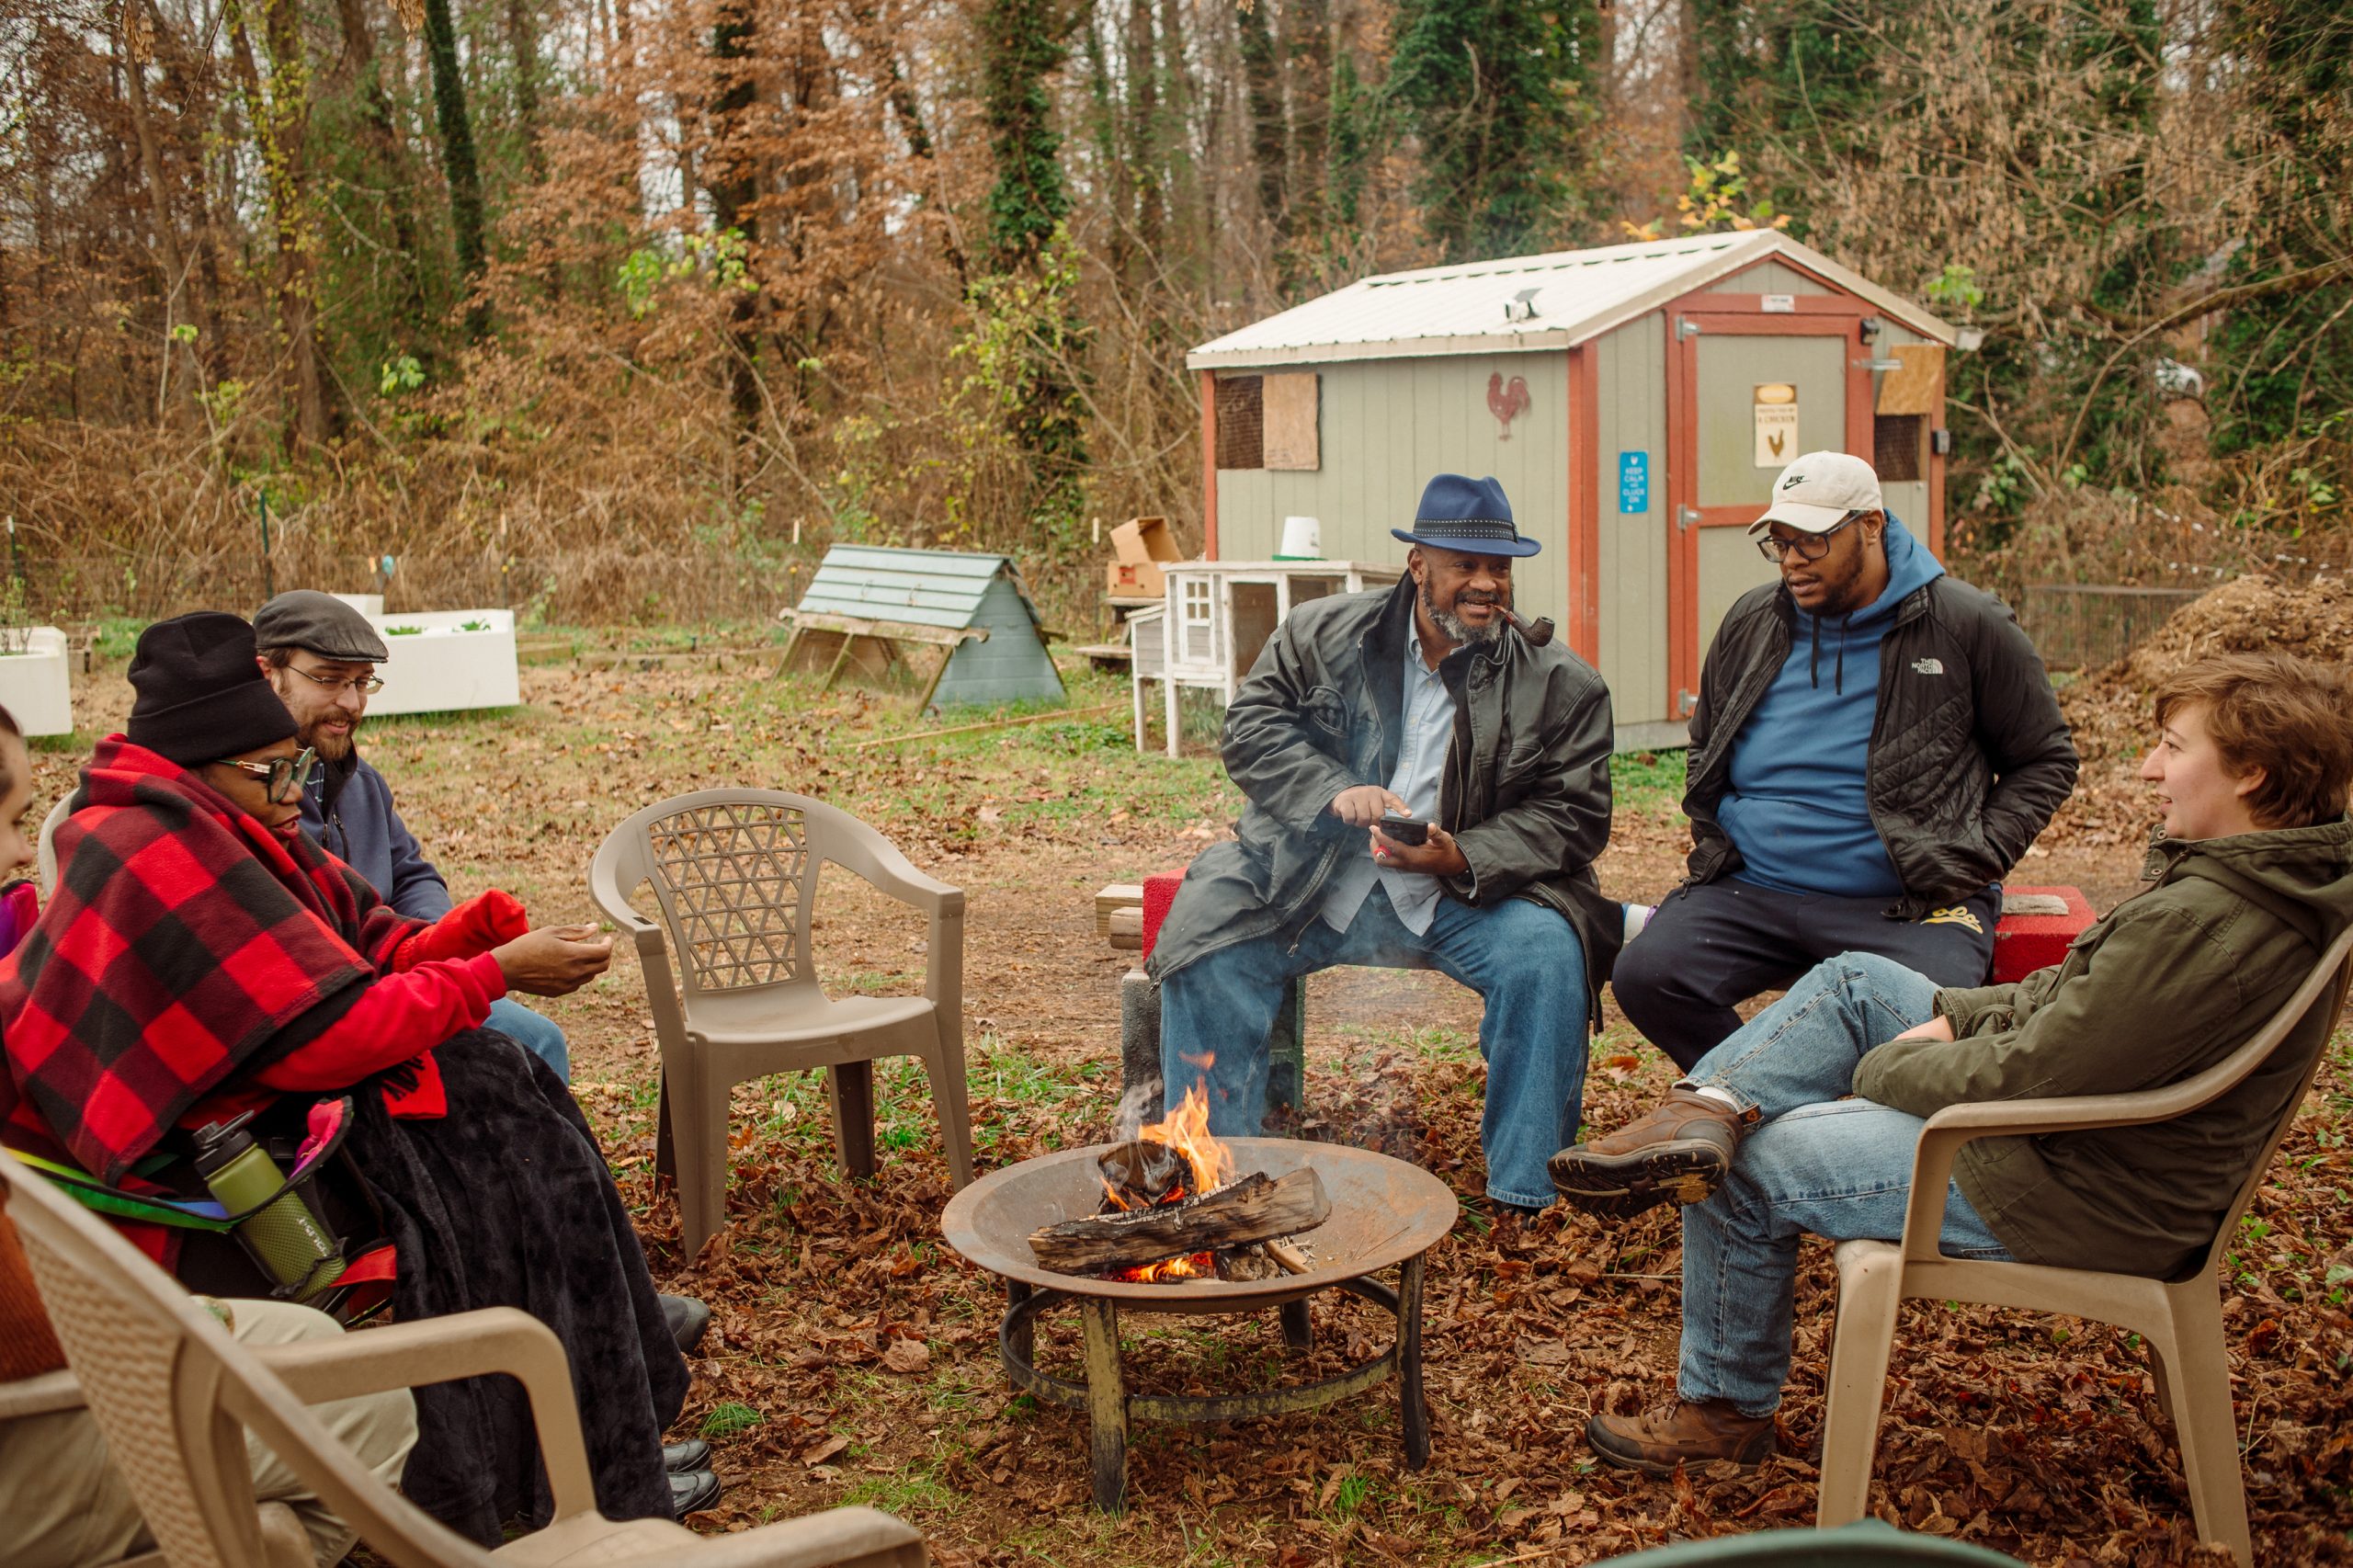 A group of people sit around a fire pit and talk.